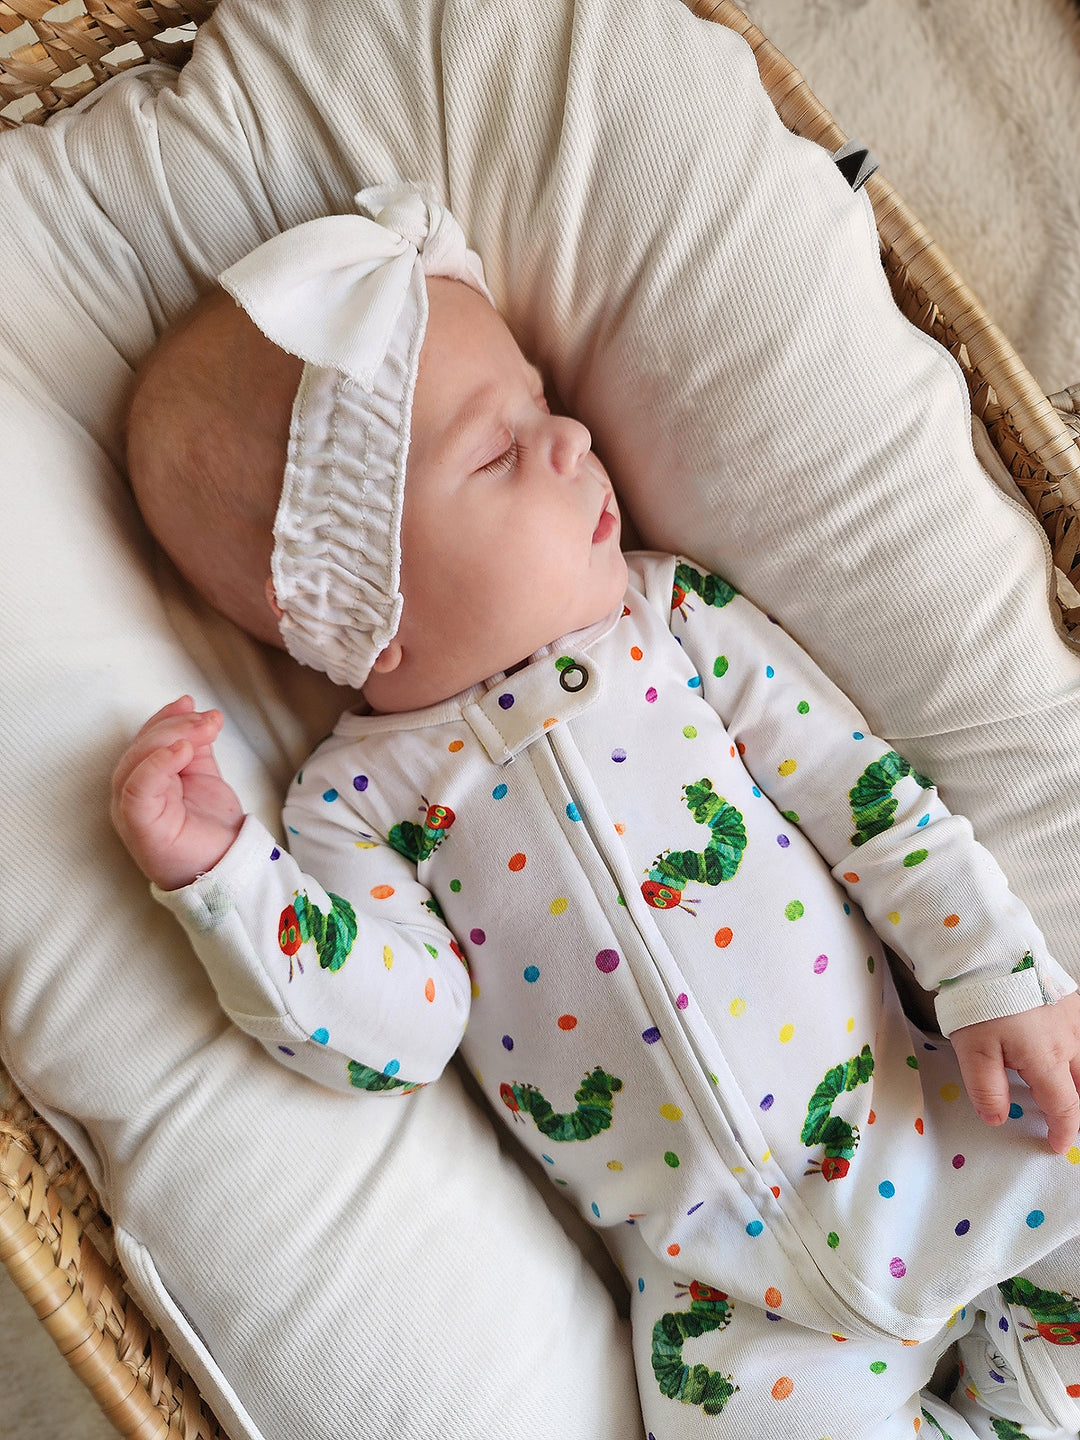 close up image of baby girl sleeping in basket, wearing the caterpillar print zipper footie and solid white headband